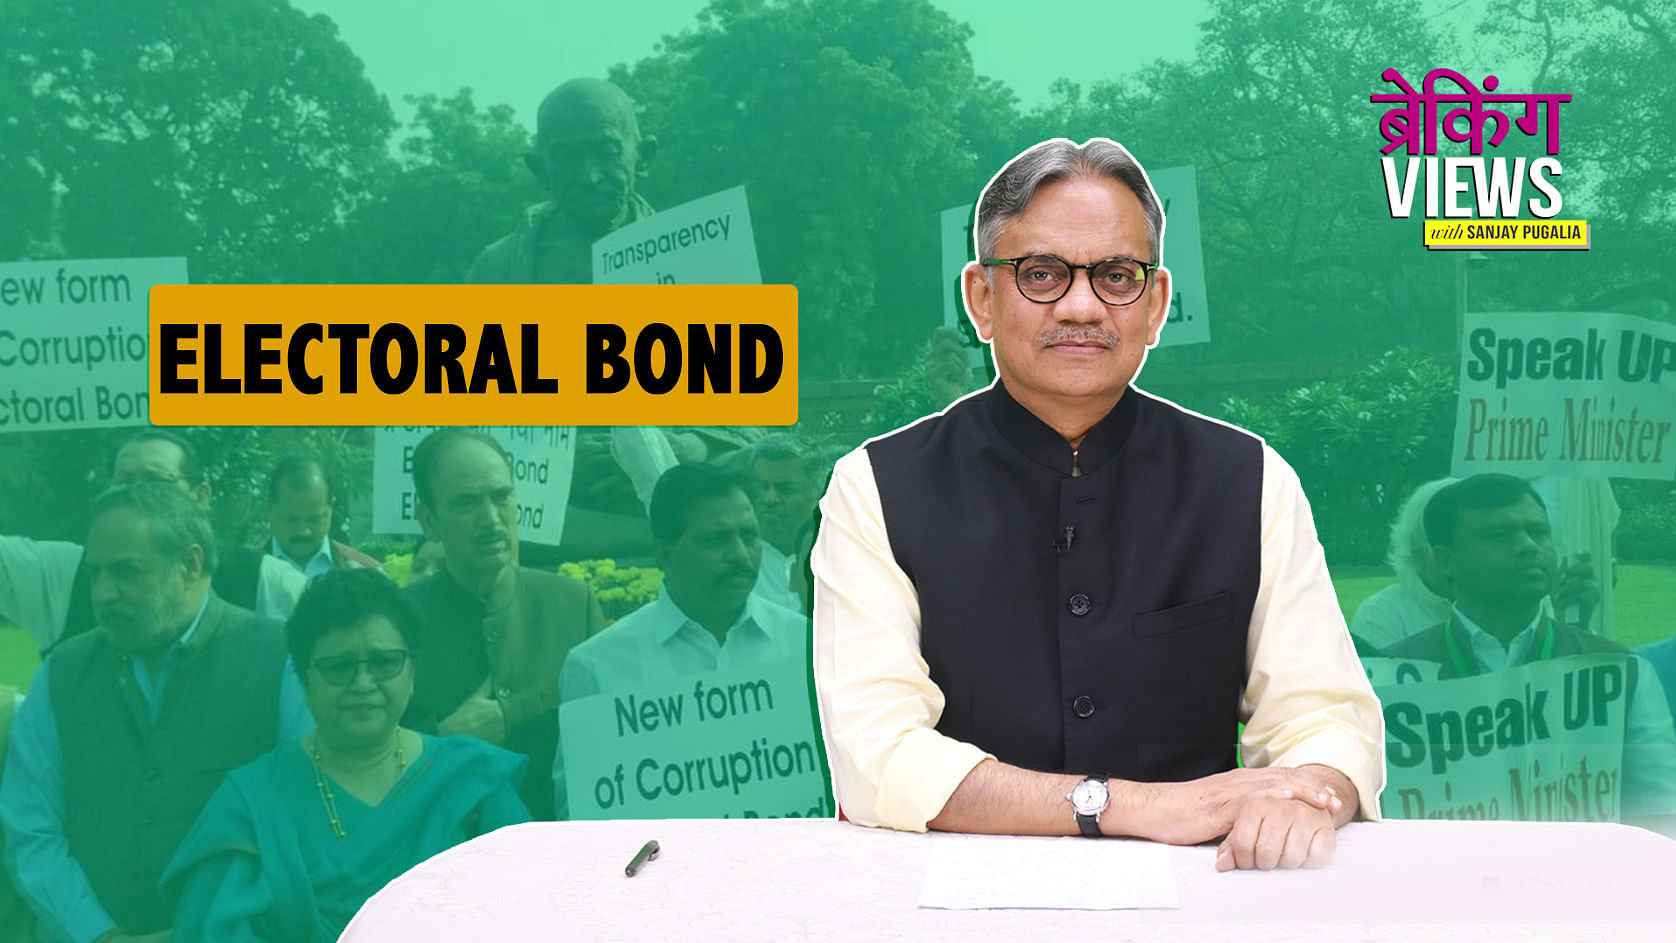 The claims that electoral bonds keep the donor anonymous, help curb the black money in politics and increase transparency, are all false.